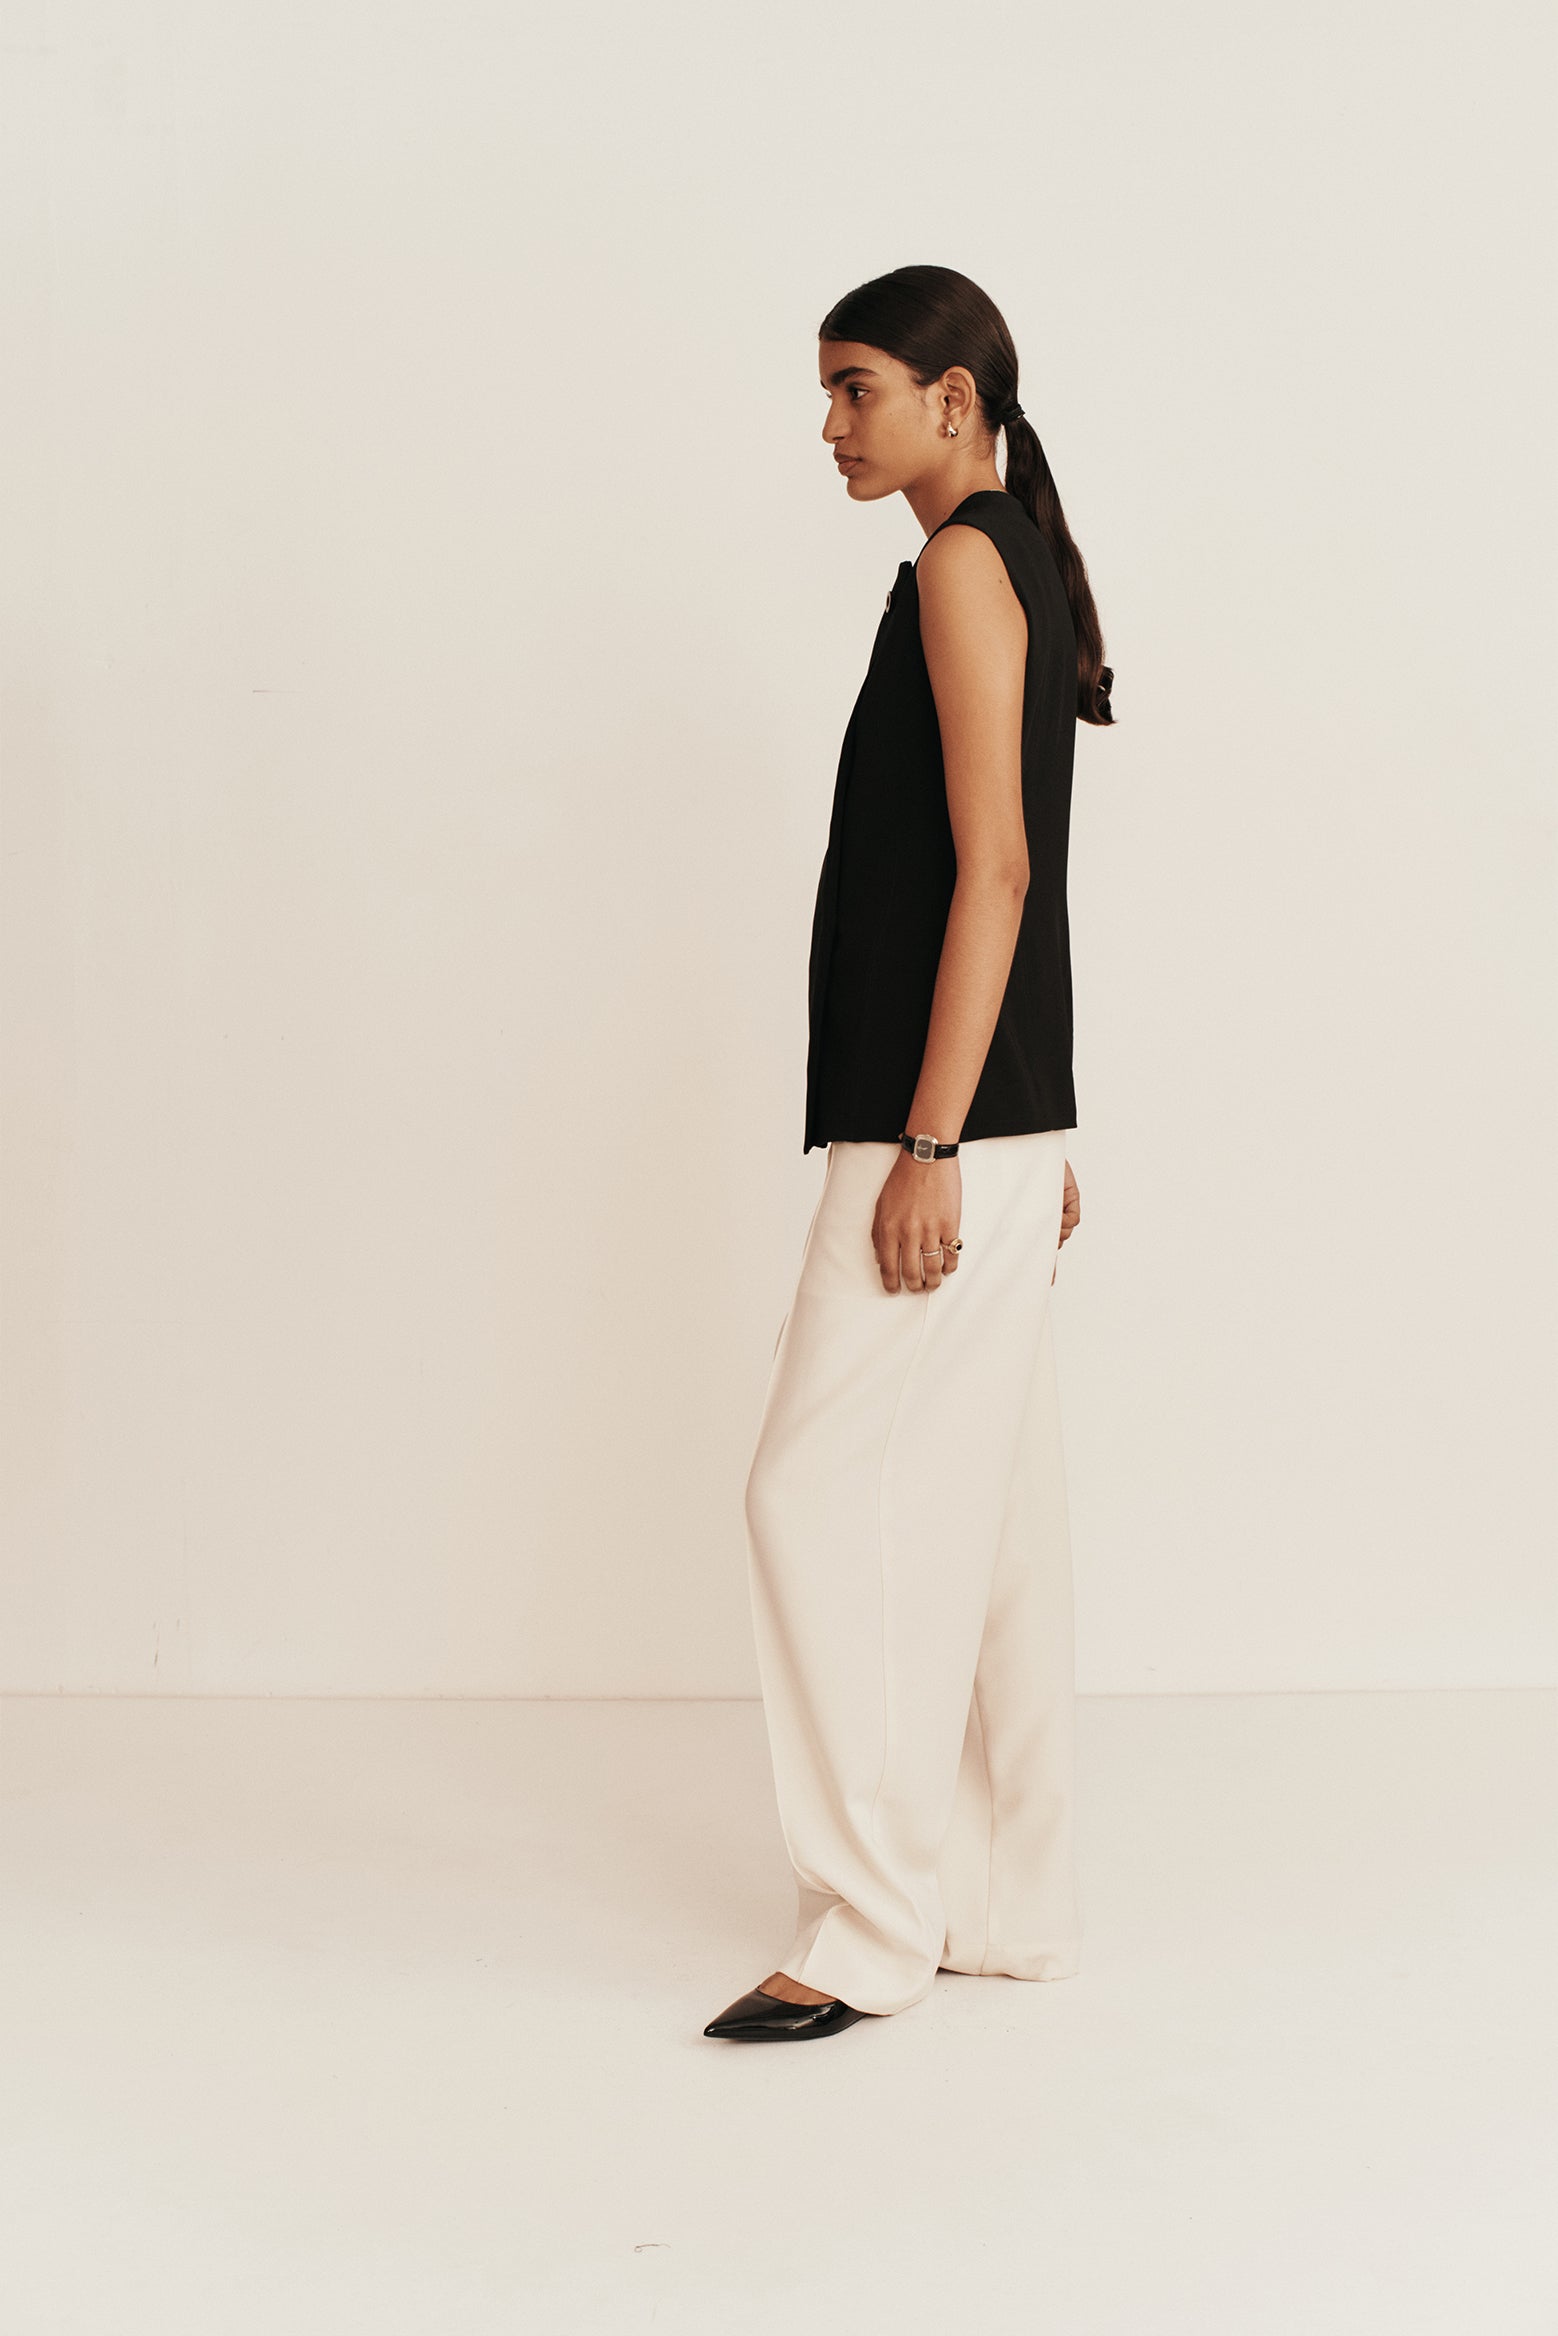 Esse Portia Tailored Trouser in Crema available at The New Trend Australia.